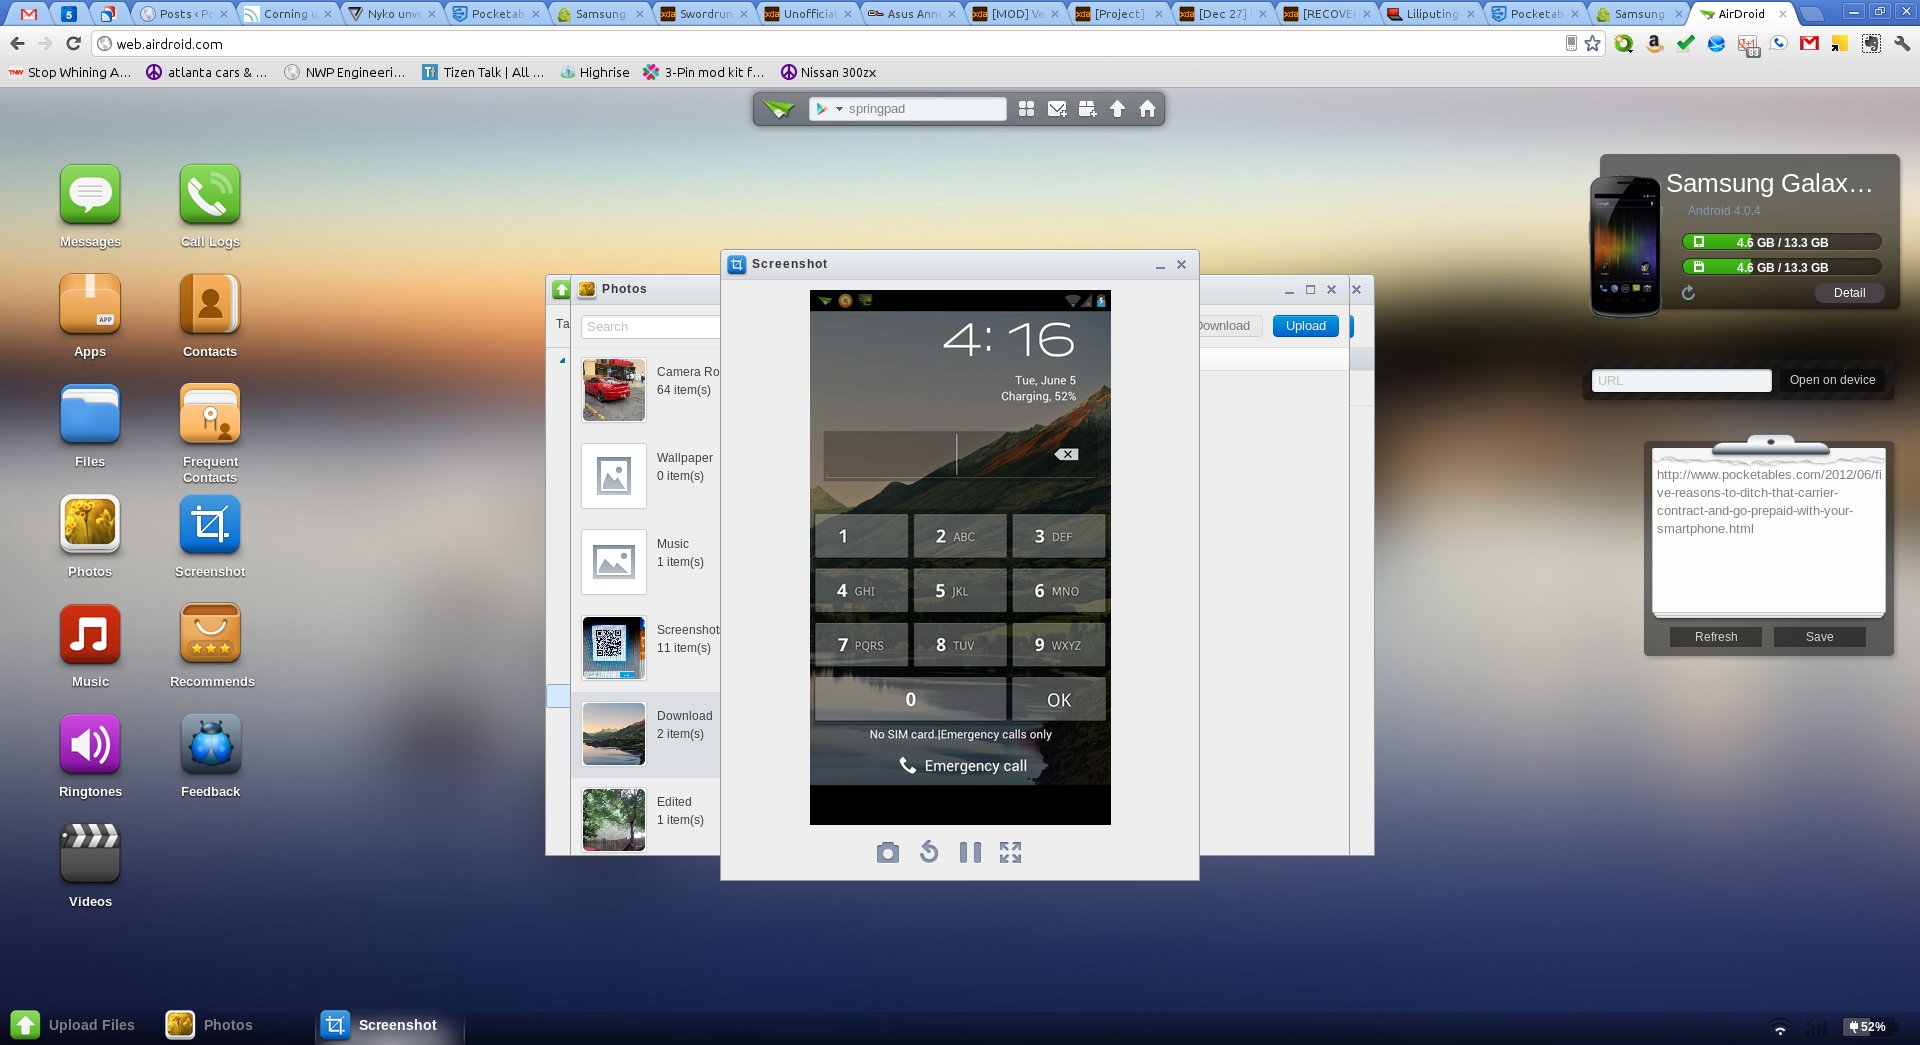 airdroid pc11 - for some reason we don't have an alt tag here